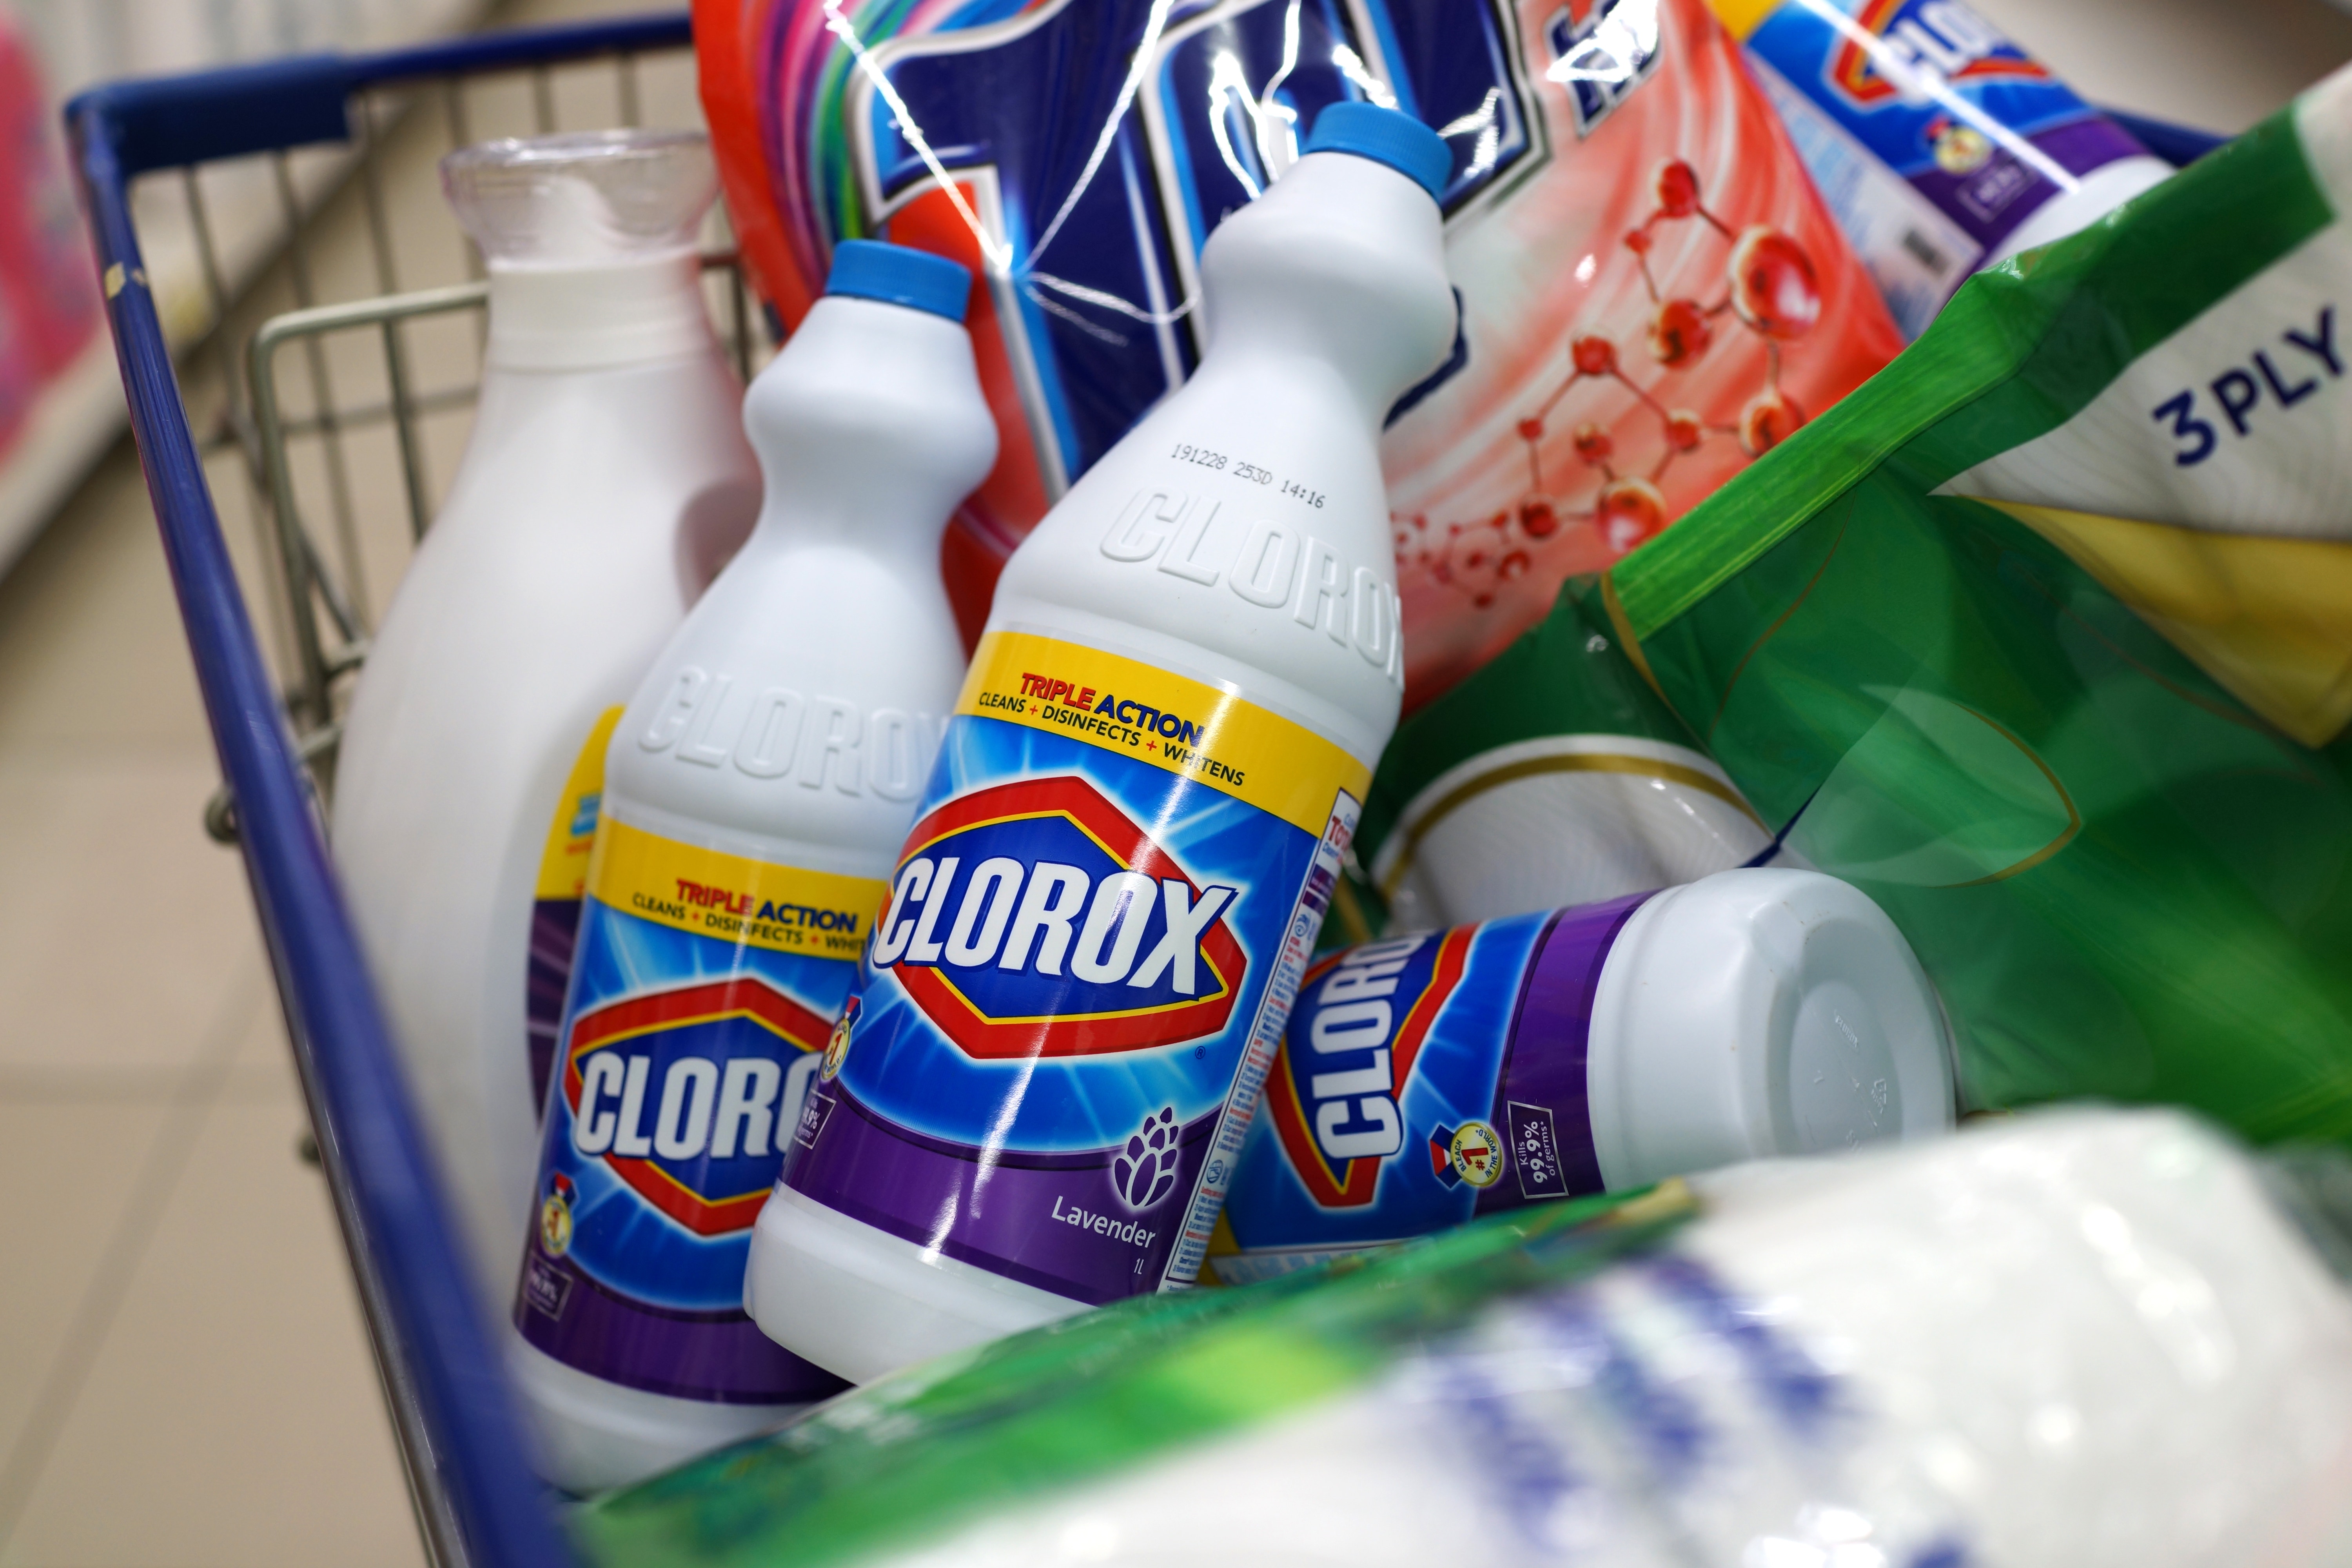 Clorox (CLX) Readies For Q4 Earnings: What's In The Cards?